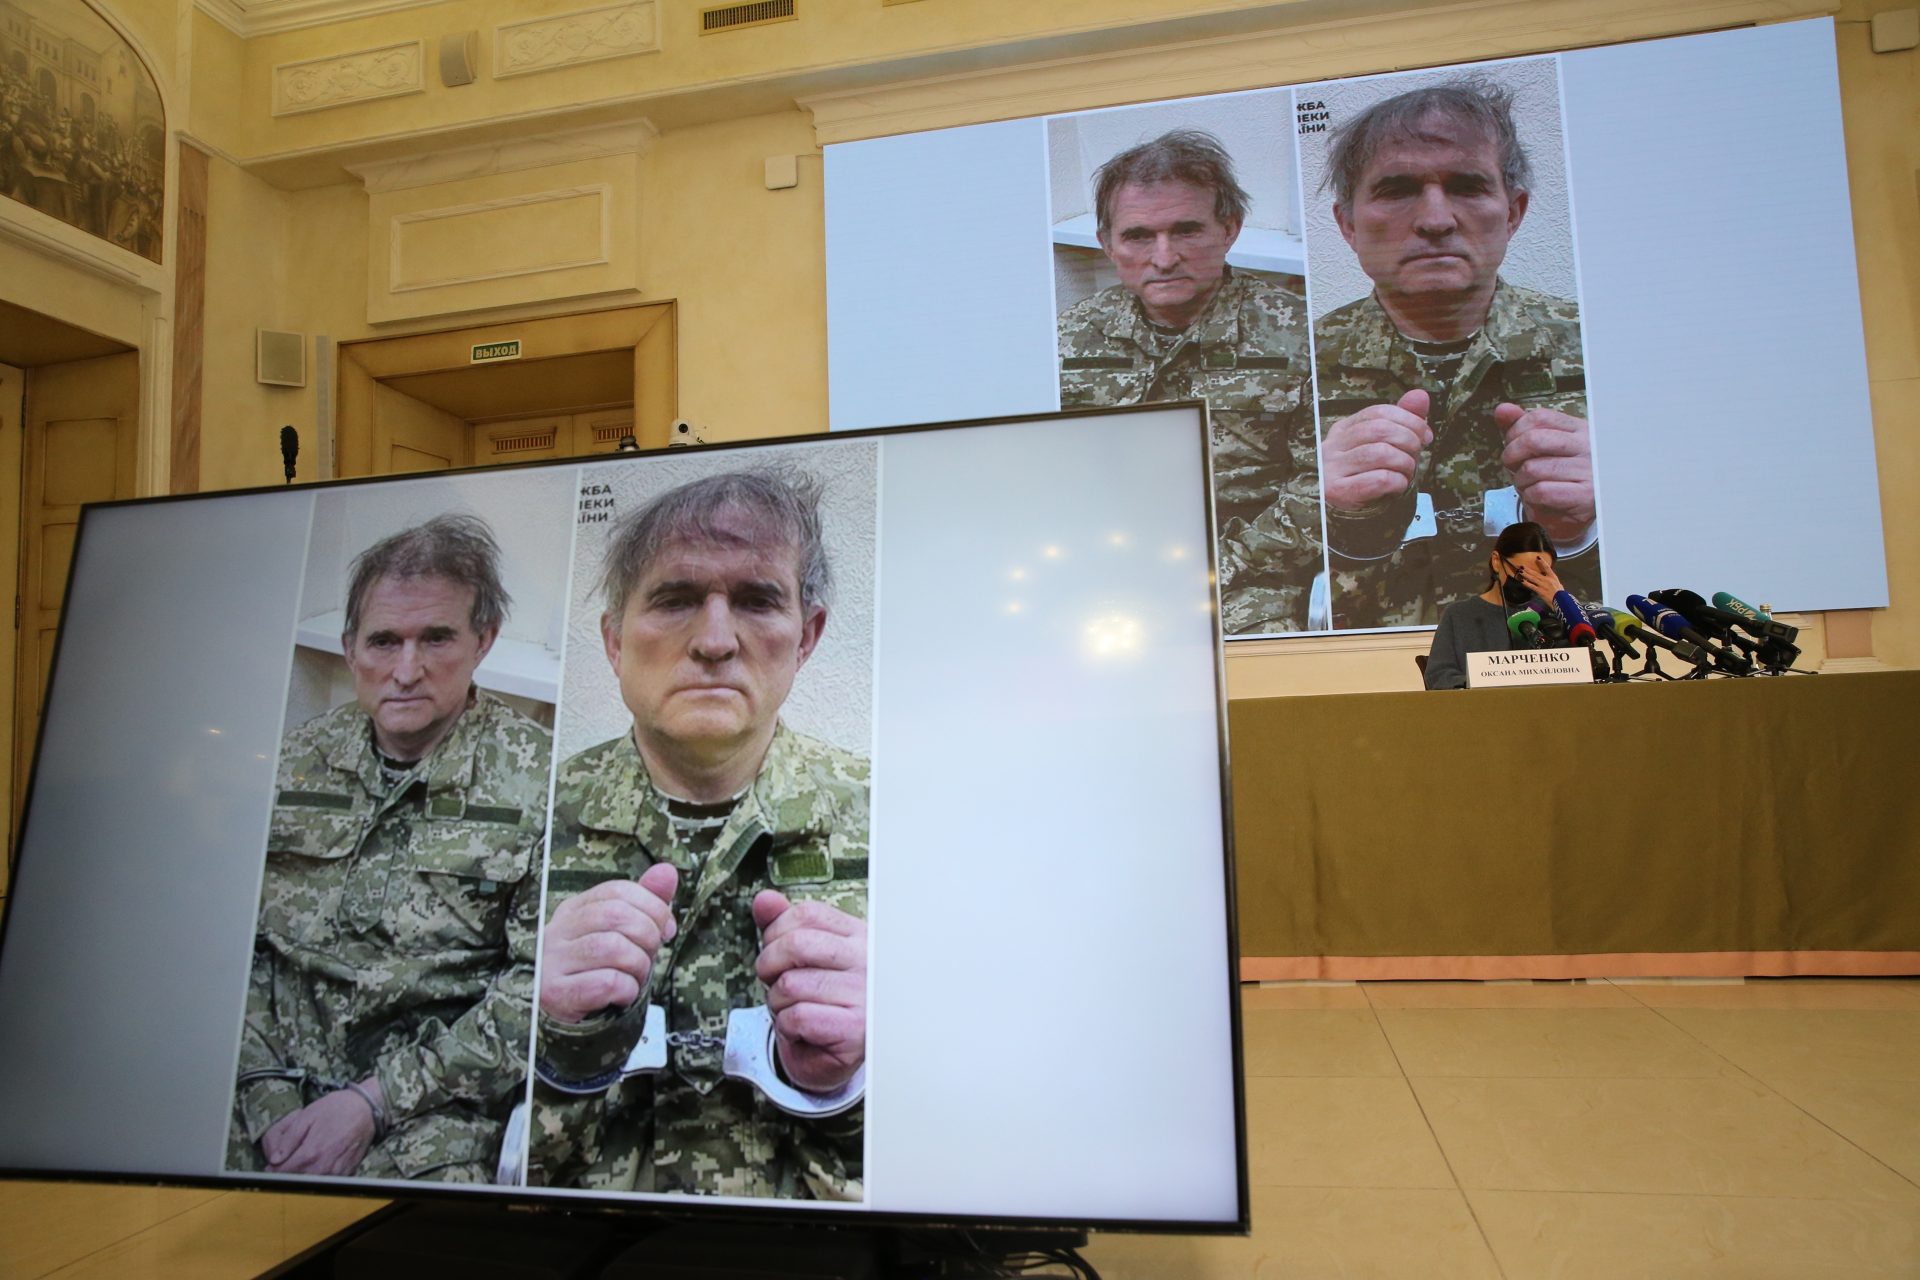 <p><span>Medvedchuk was arrested by Ukrainian counterintelligence in 2022 following Russia’s invasion of Ukraine and he was charged with treason. However, Medvedchuk was later swapped in a prisoner exchange with Russia for 200 Ukrainian prisoners of war. </span></p>